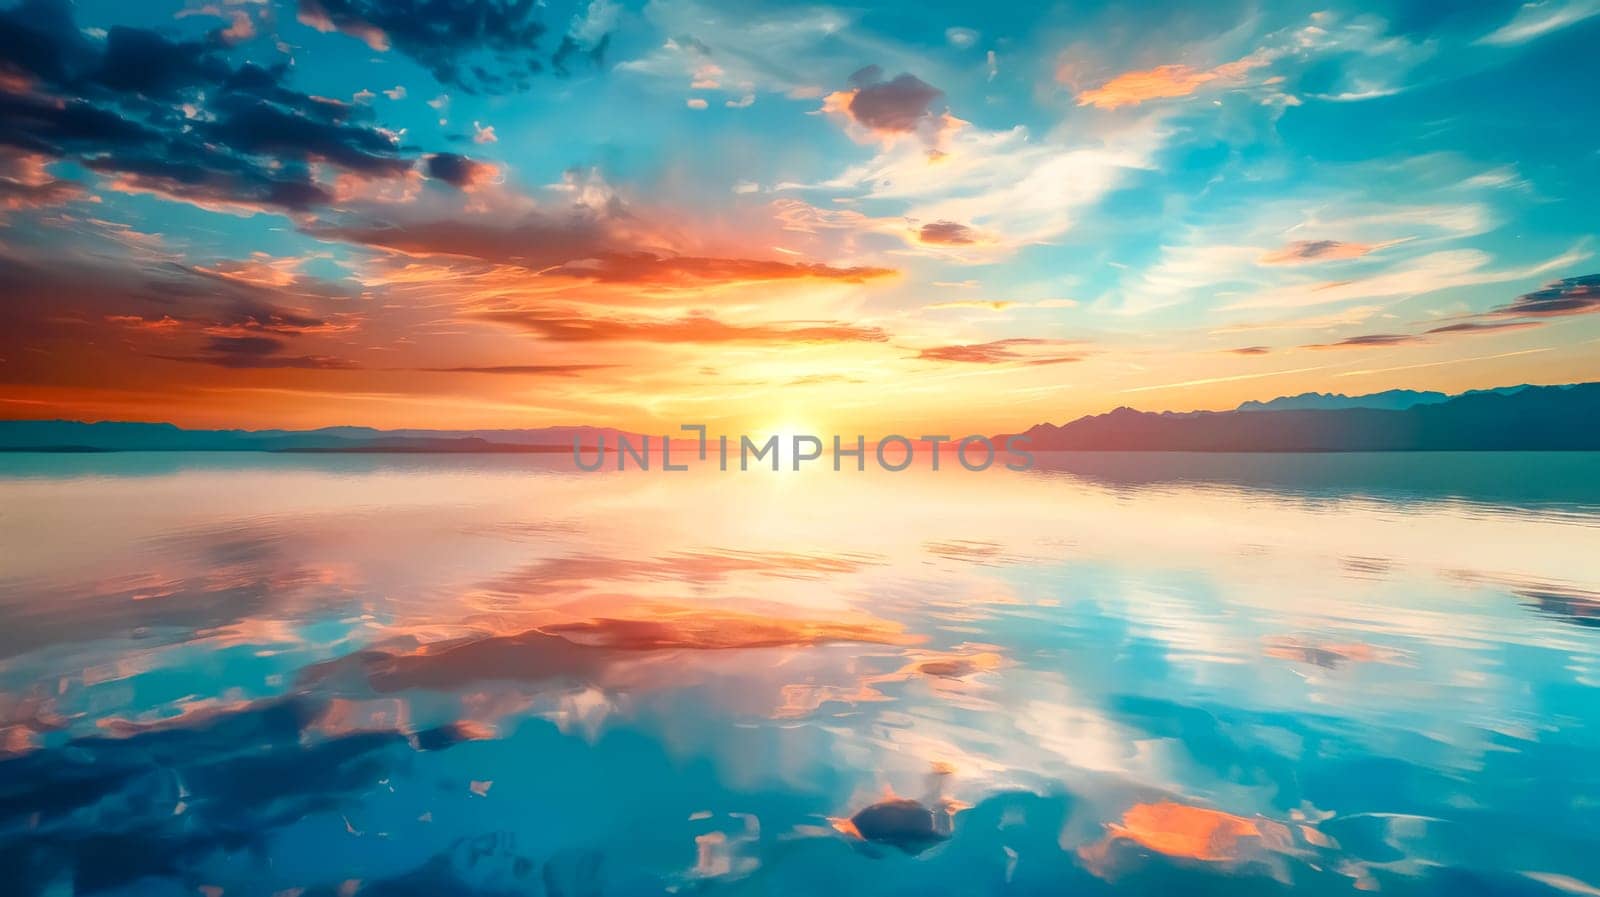 Vibrant sunset with rich colors reflecting off calm lake waters against a mountain backdrop